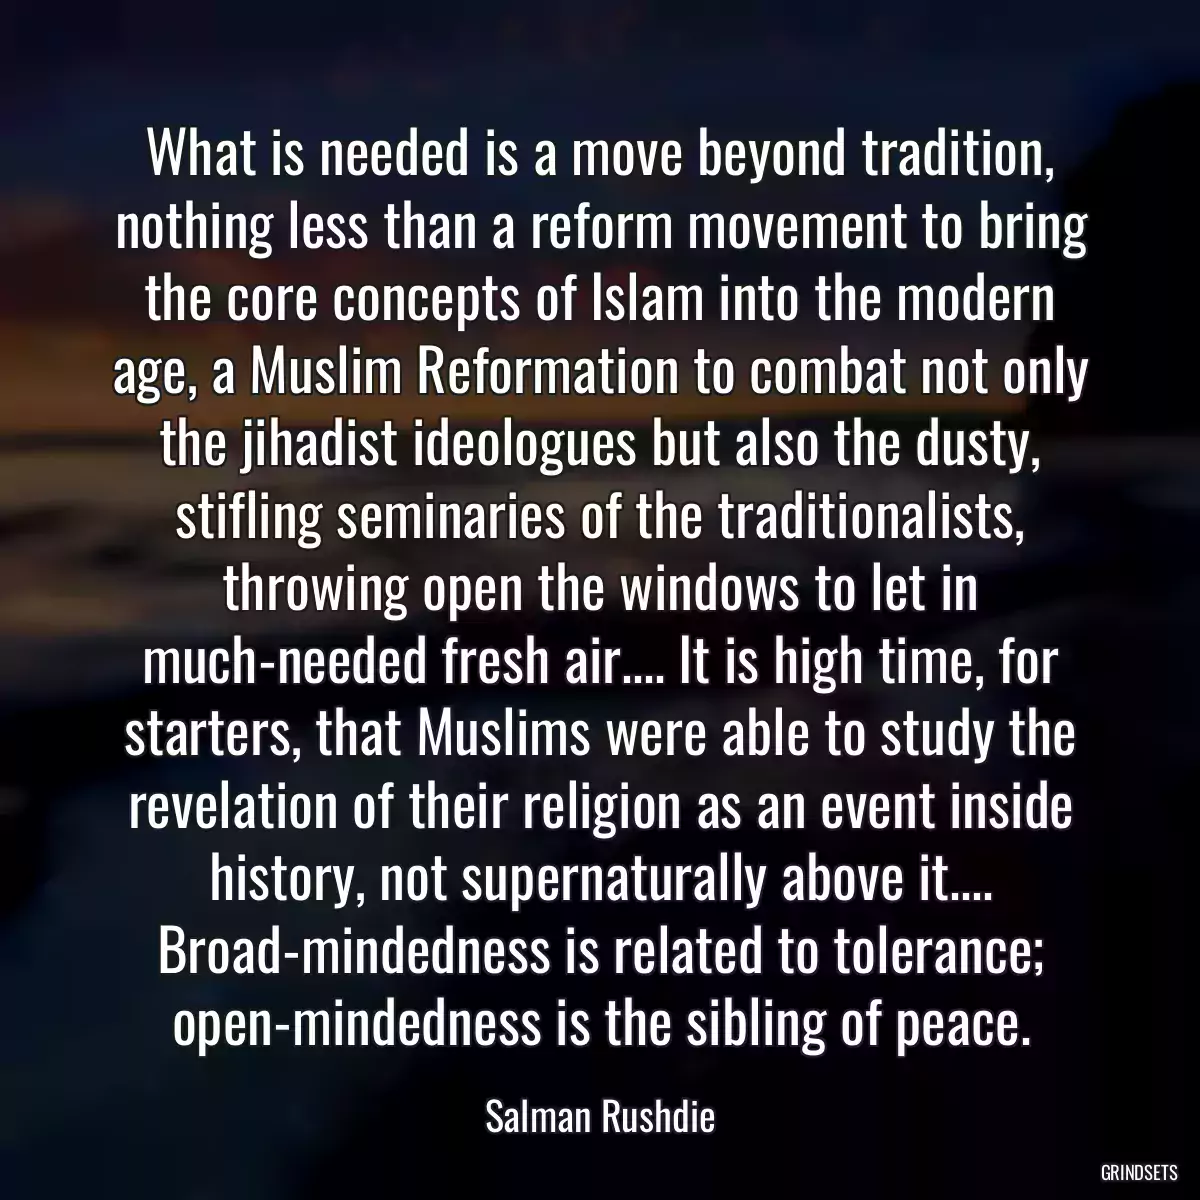 What is needed is a move beyond tradition, nothing less than a reform movement to bring the core concepts of Islam into the modern age, a Muslim Reformation to combat not only the jihadist ideologues but also the dusty, stifling seminaries of the traditionalists, throwing open the windows to let in much-needed fresh air.... It is high time, for starters, that Muslims were able to study the revelation of their religion as an event inside history, not supernaturally above it.... Broad-mindedness is related to tolerance; open-mindedness is the sibling of peace.